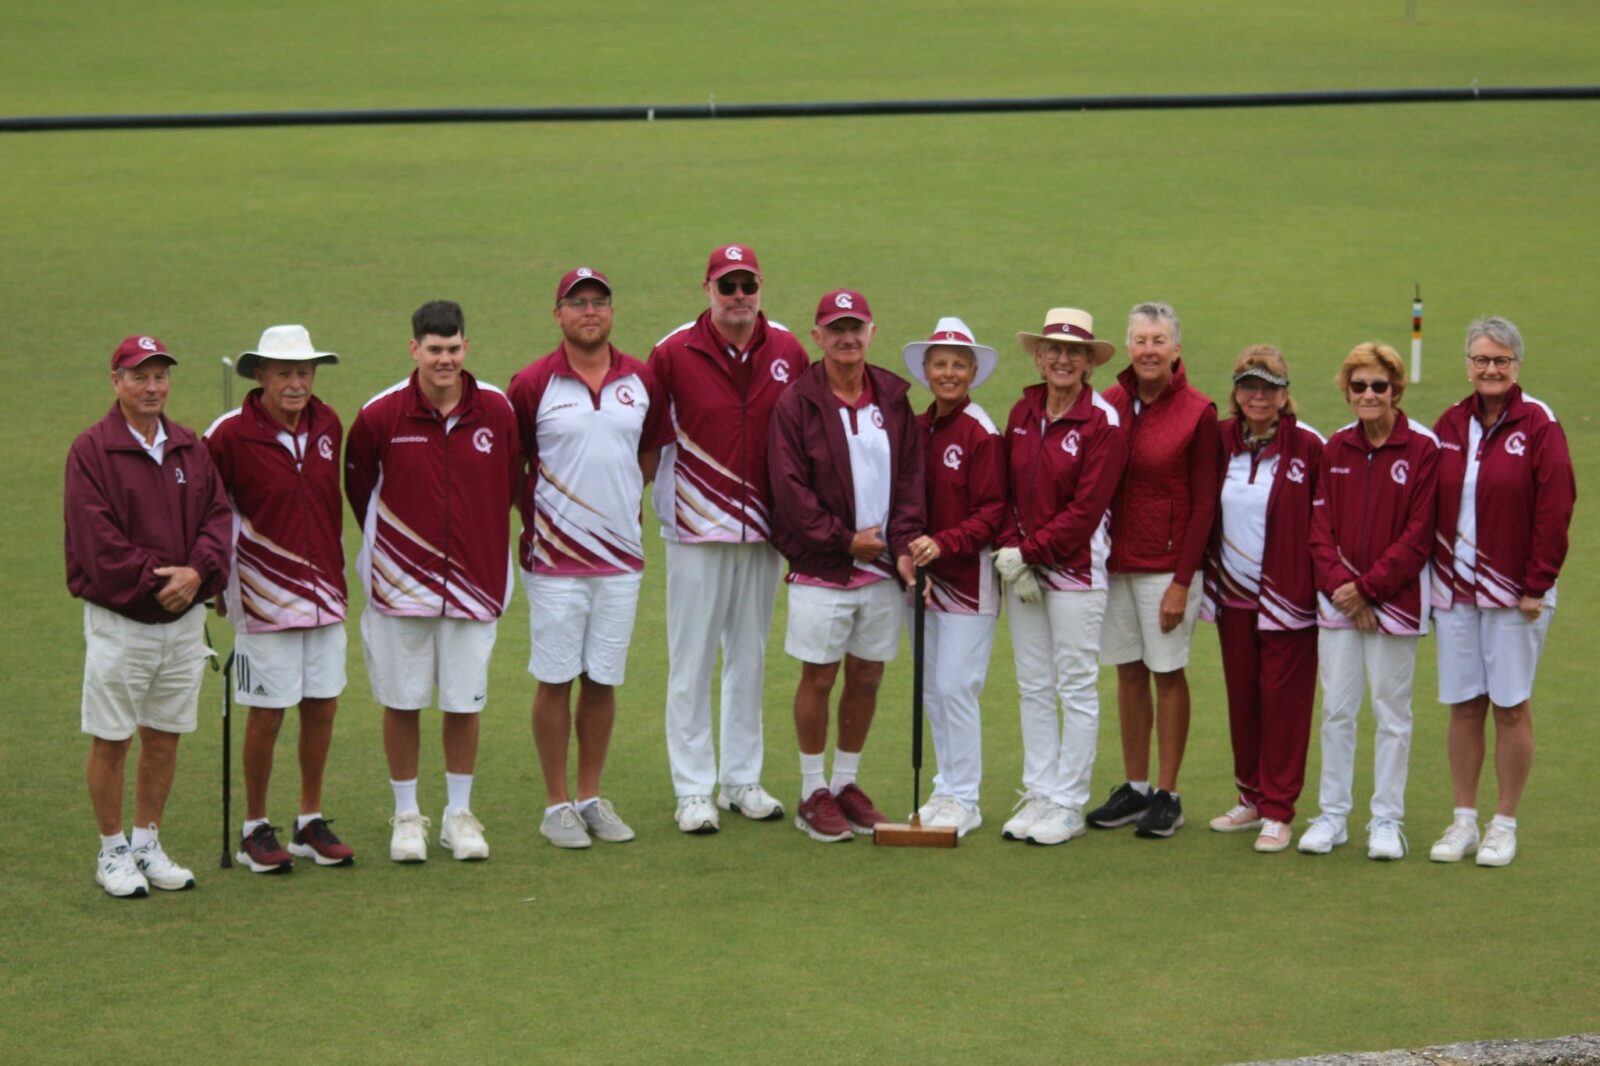 Qld Golf players in Perth